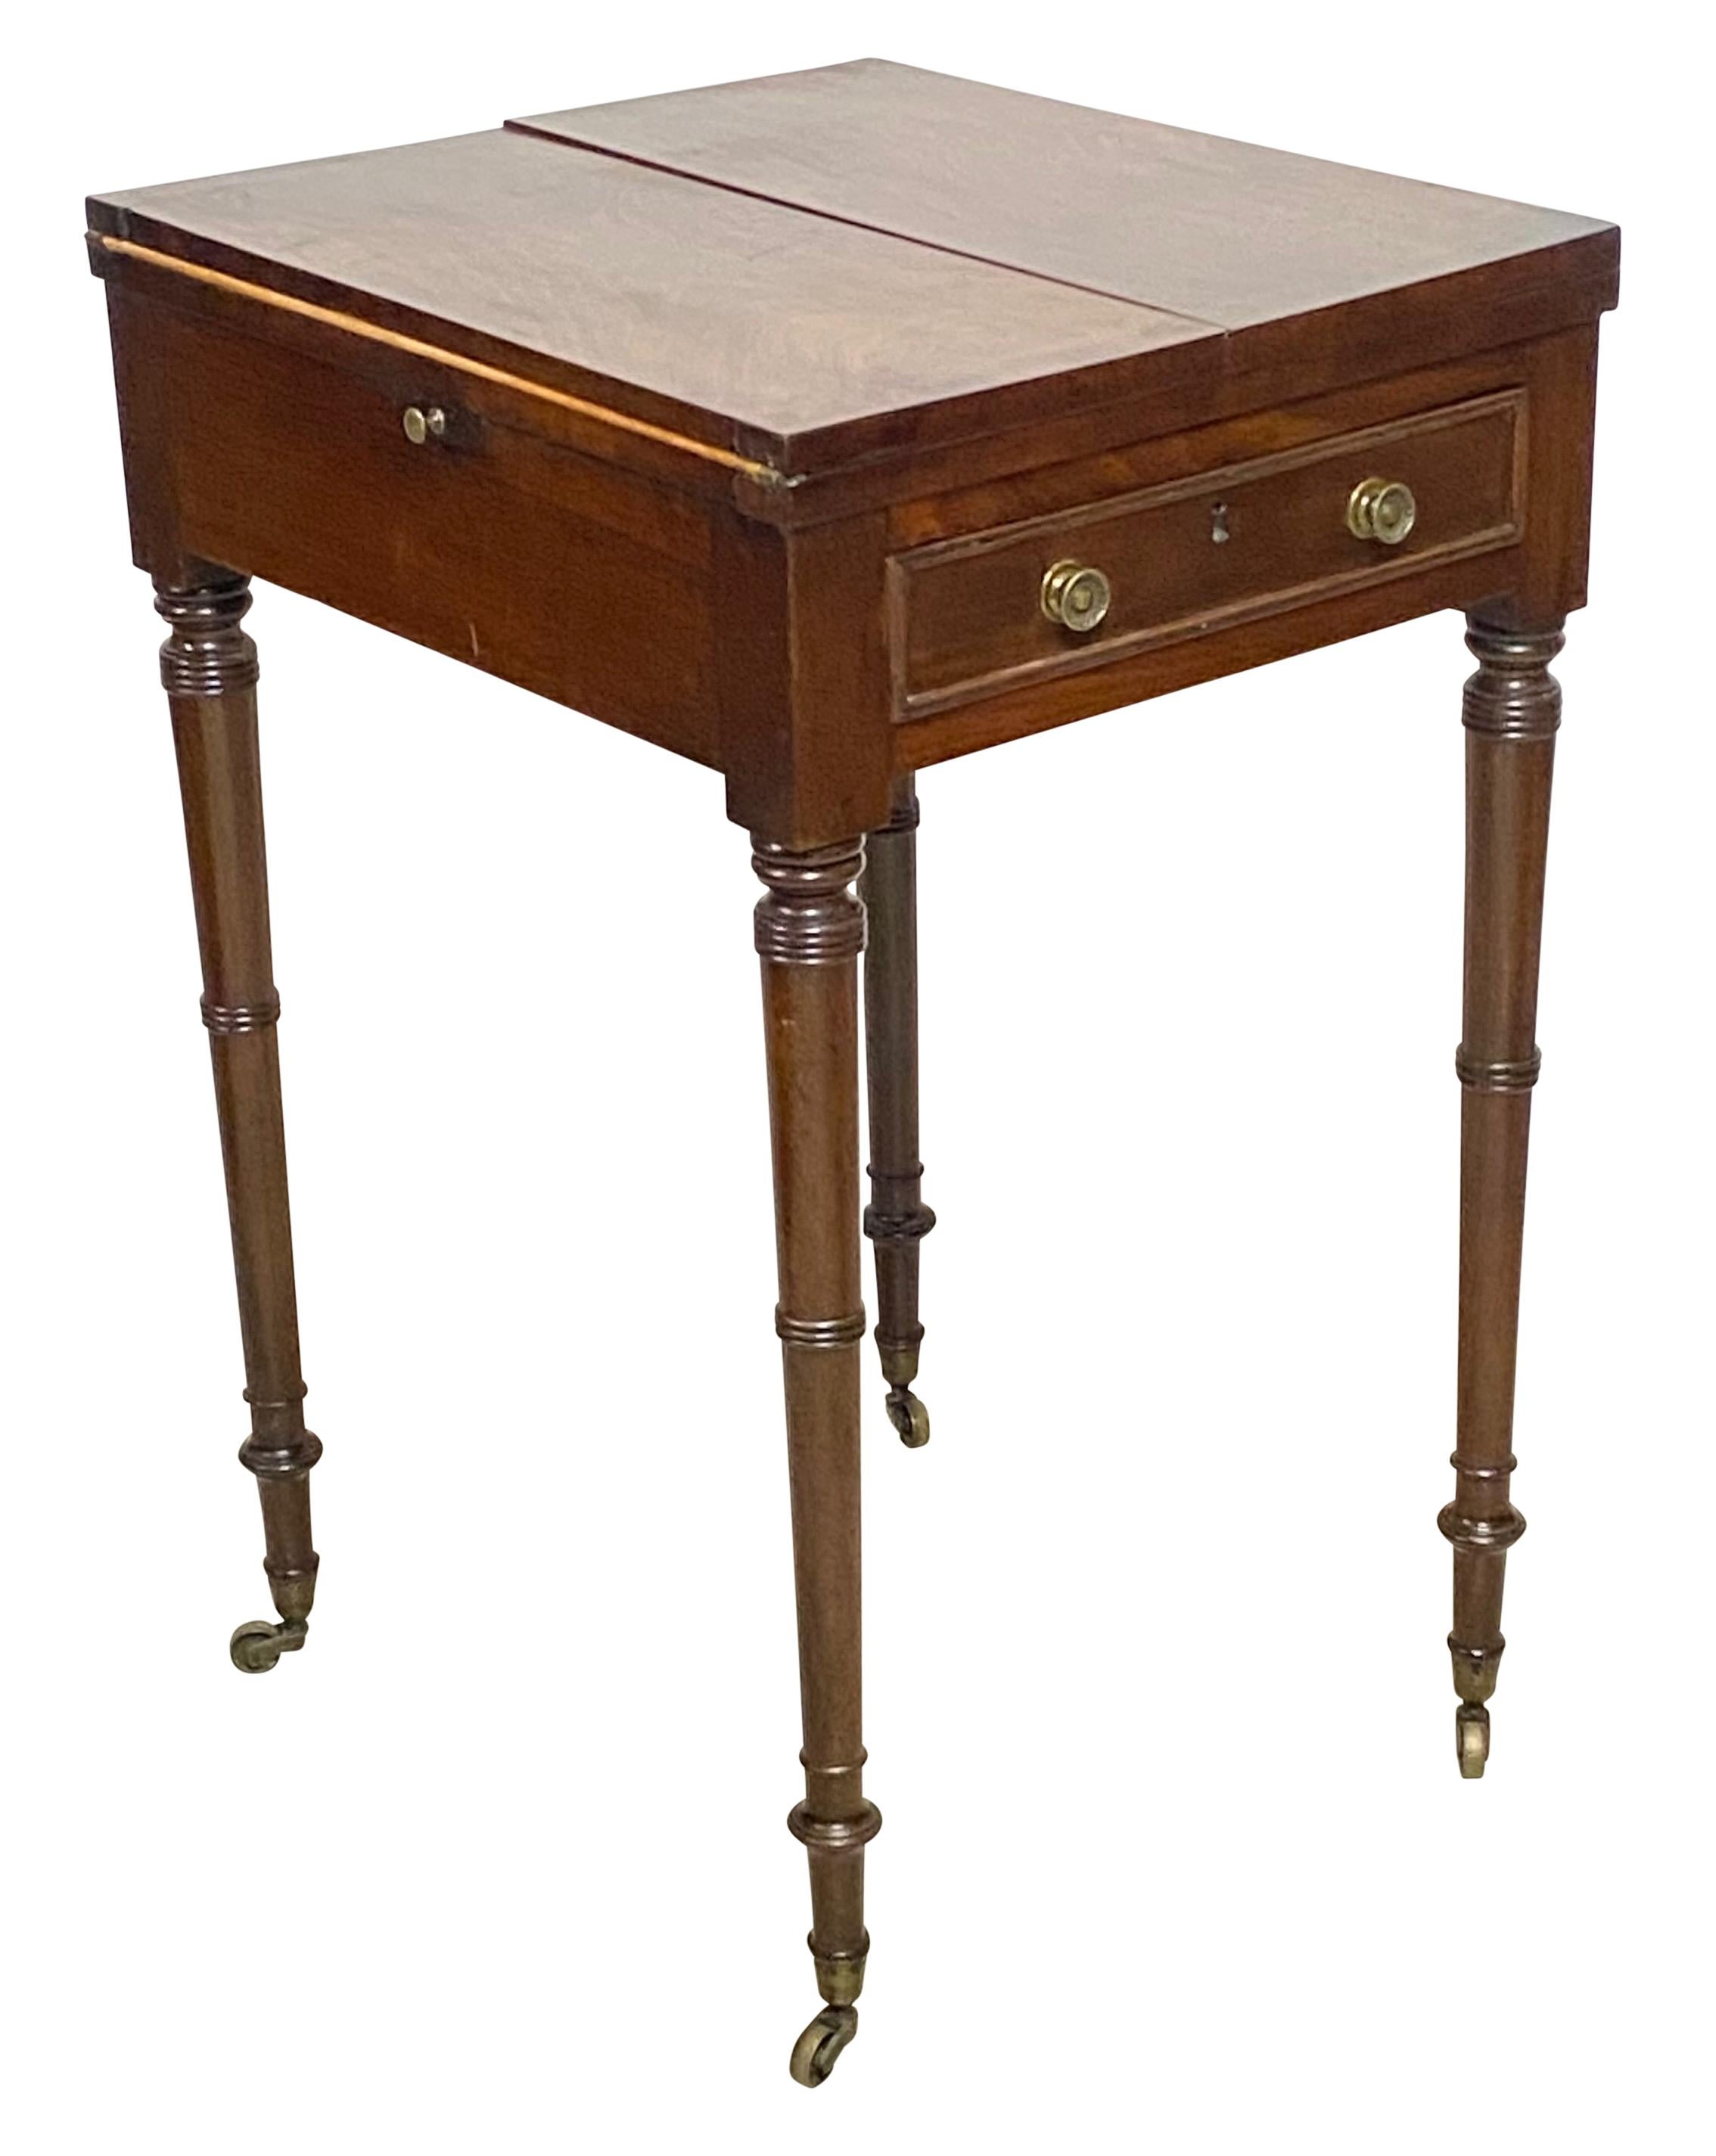 Regency Mahogany and Leather Side Table, English Early 19th Century For Sale 1